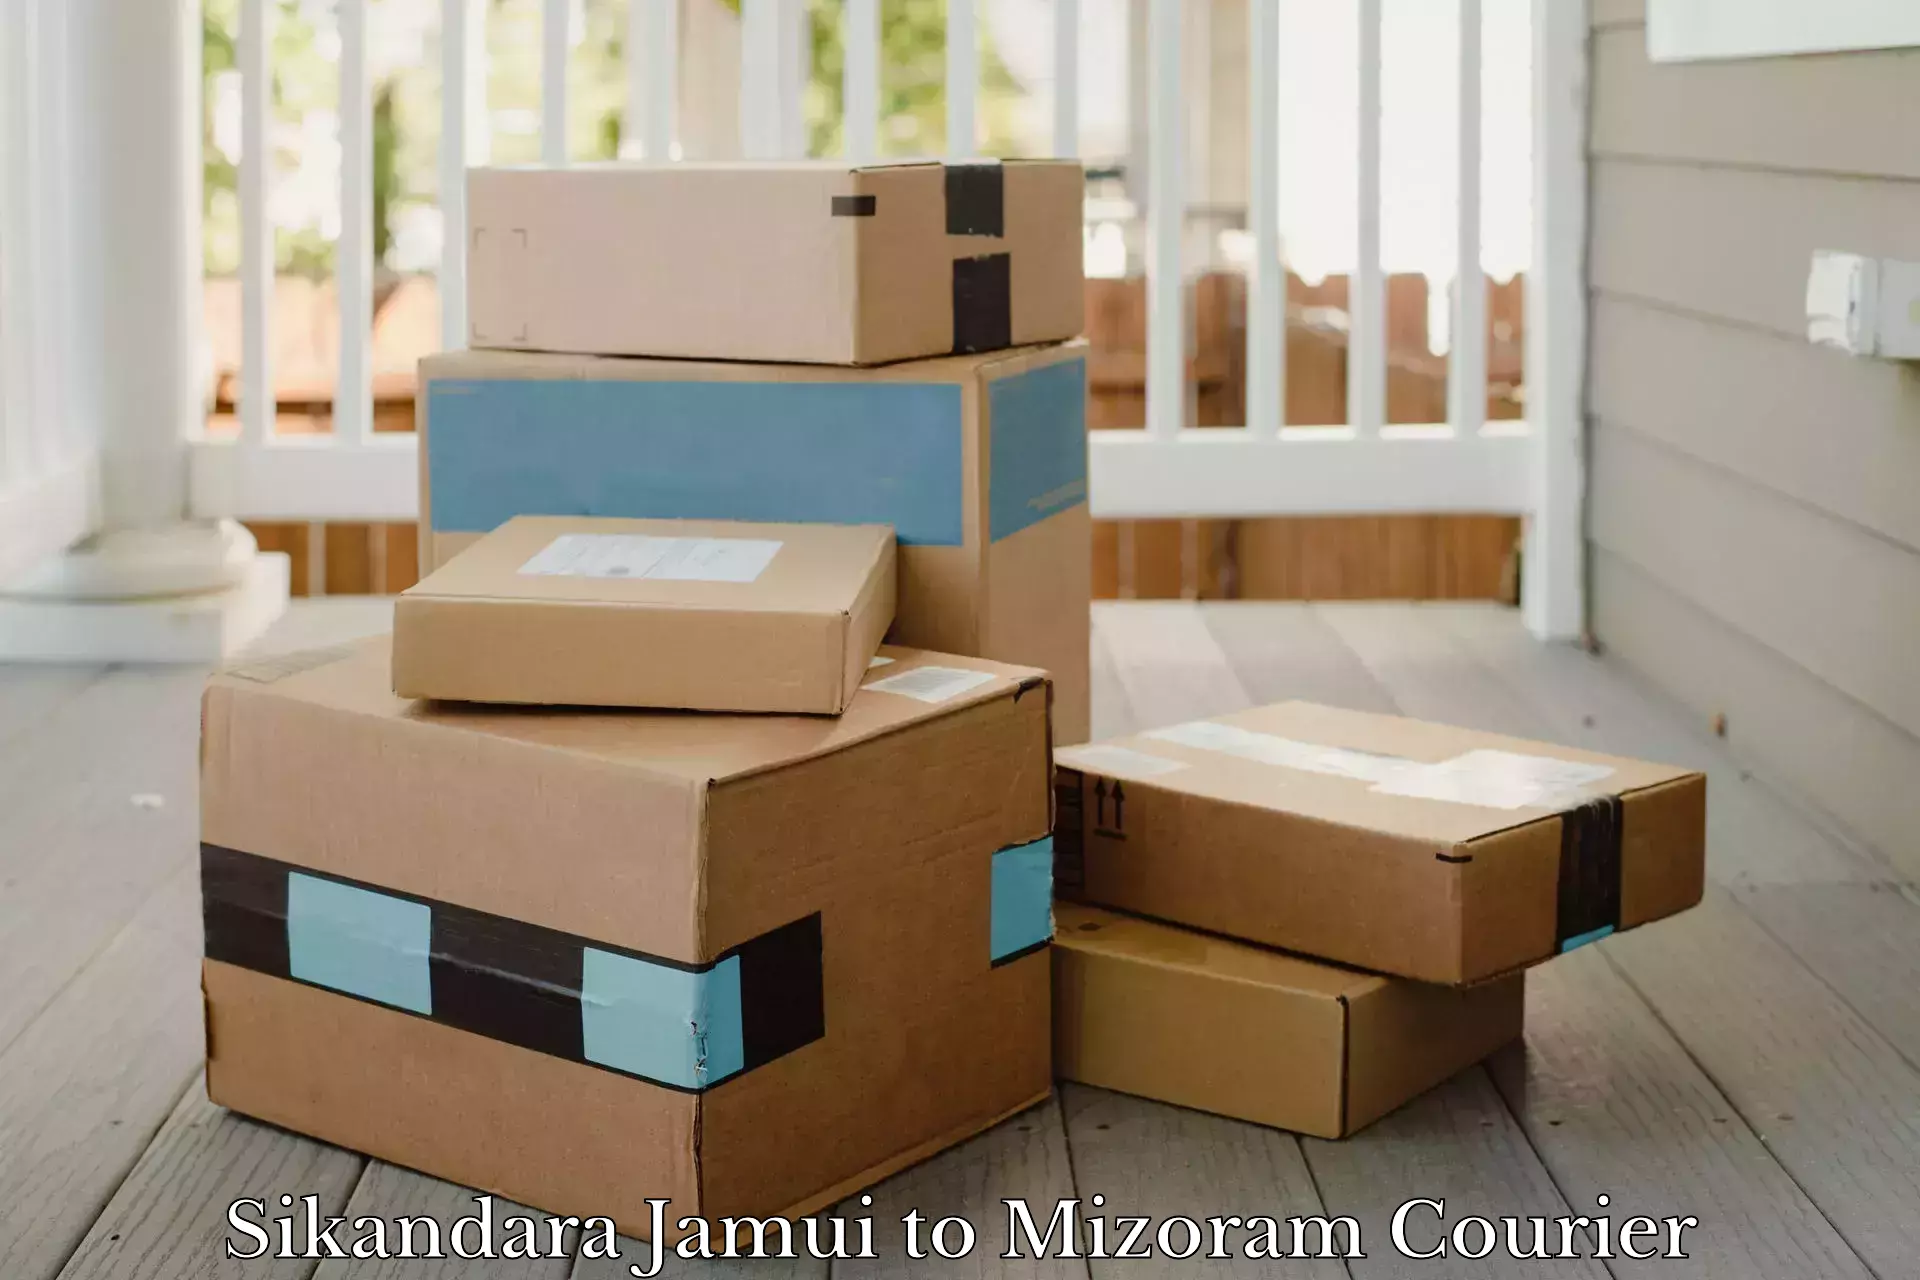 Reliable courier services in Sikandara Jamui to Mizoram